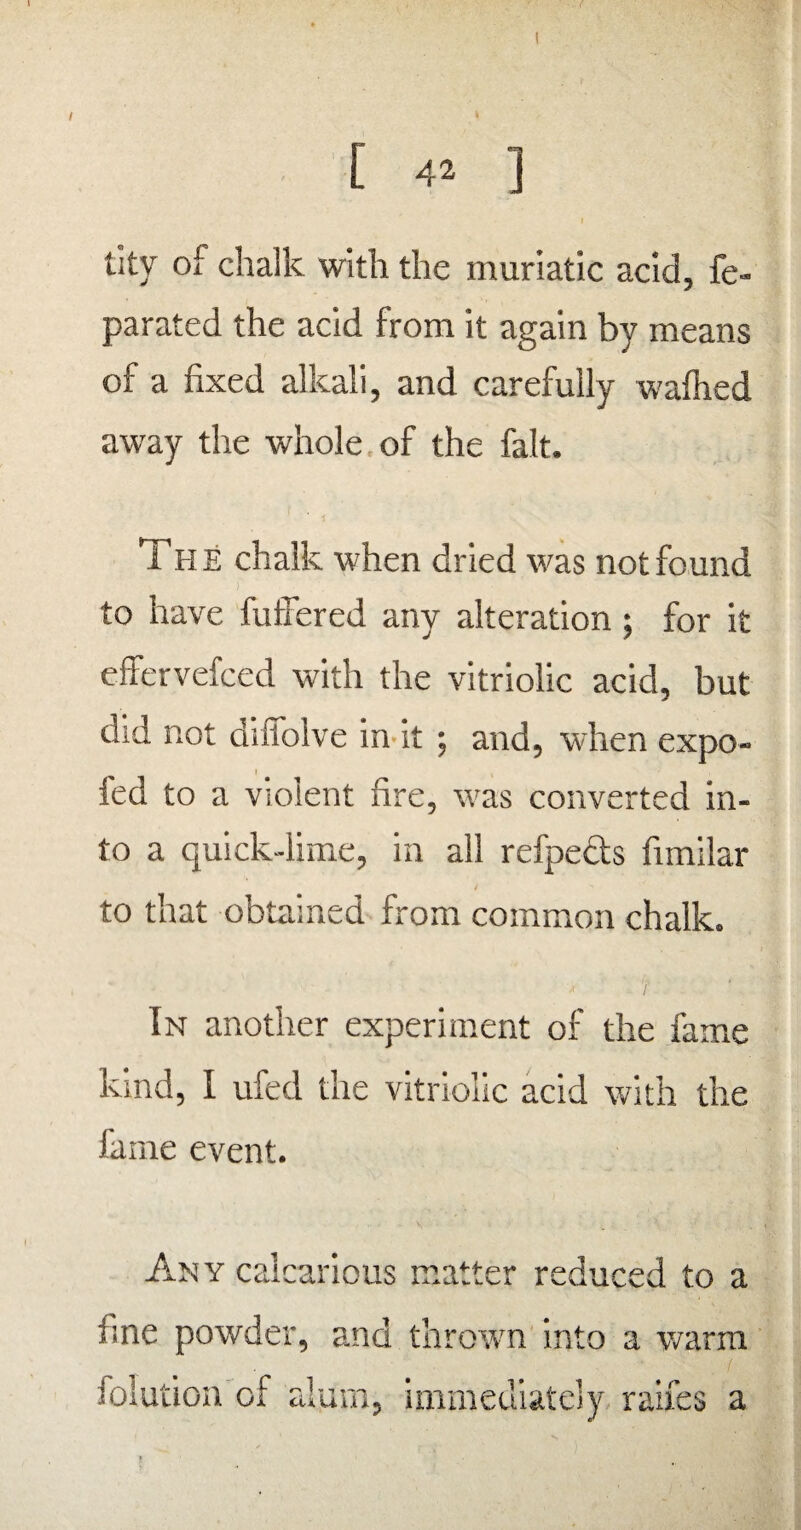 ! / * [ 42 ] tity of chalk with the muriatic acid, fe- parated the acid from it again by means of a fixed alkali, and carefully walhed away the whole of the fait. The chalk when dried was not found to have fuffered any alteration; for it effervefced with the vitriolic acid, but did not diilolve in it ; and, when expo- fed to a violent fire, was converted in¬ to a quick-lime, in all refpeds fimilar to that obtained from common chalk. In another experiment of the fame kind, I ufed the vitriolic acid with the fame event. Any calcarious matter reduced to a fine powder, and thrown into a warm folution of alum, immediately raifes a